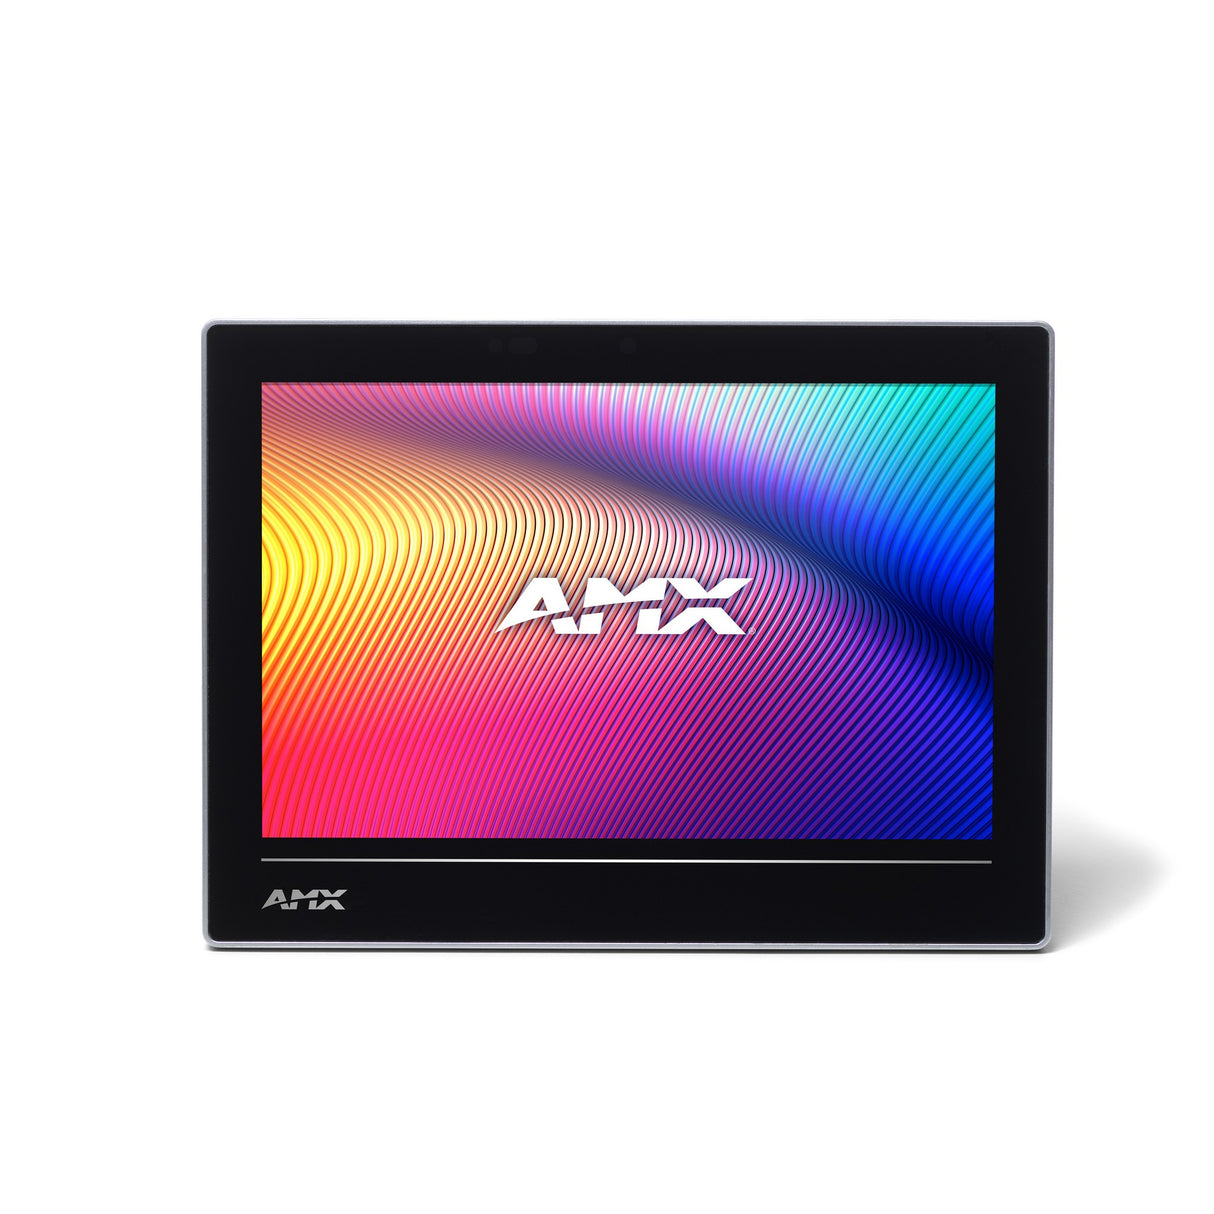 AMX VARIA-80 8-Inch Professional-Grade Persona-Defined Touch Panel